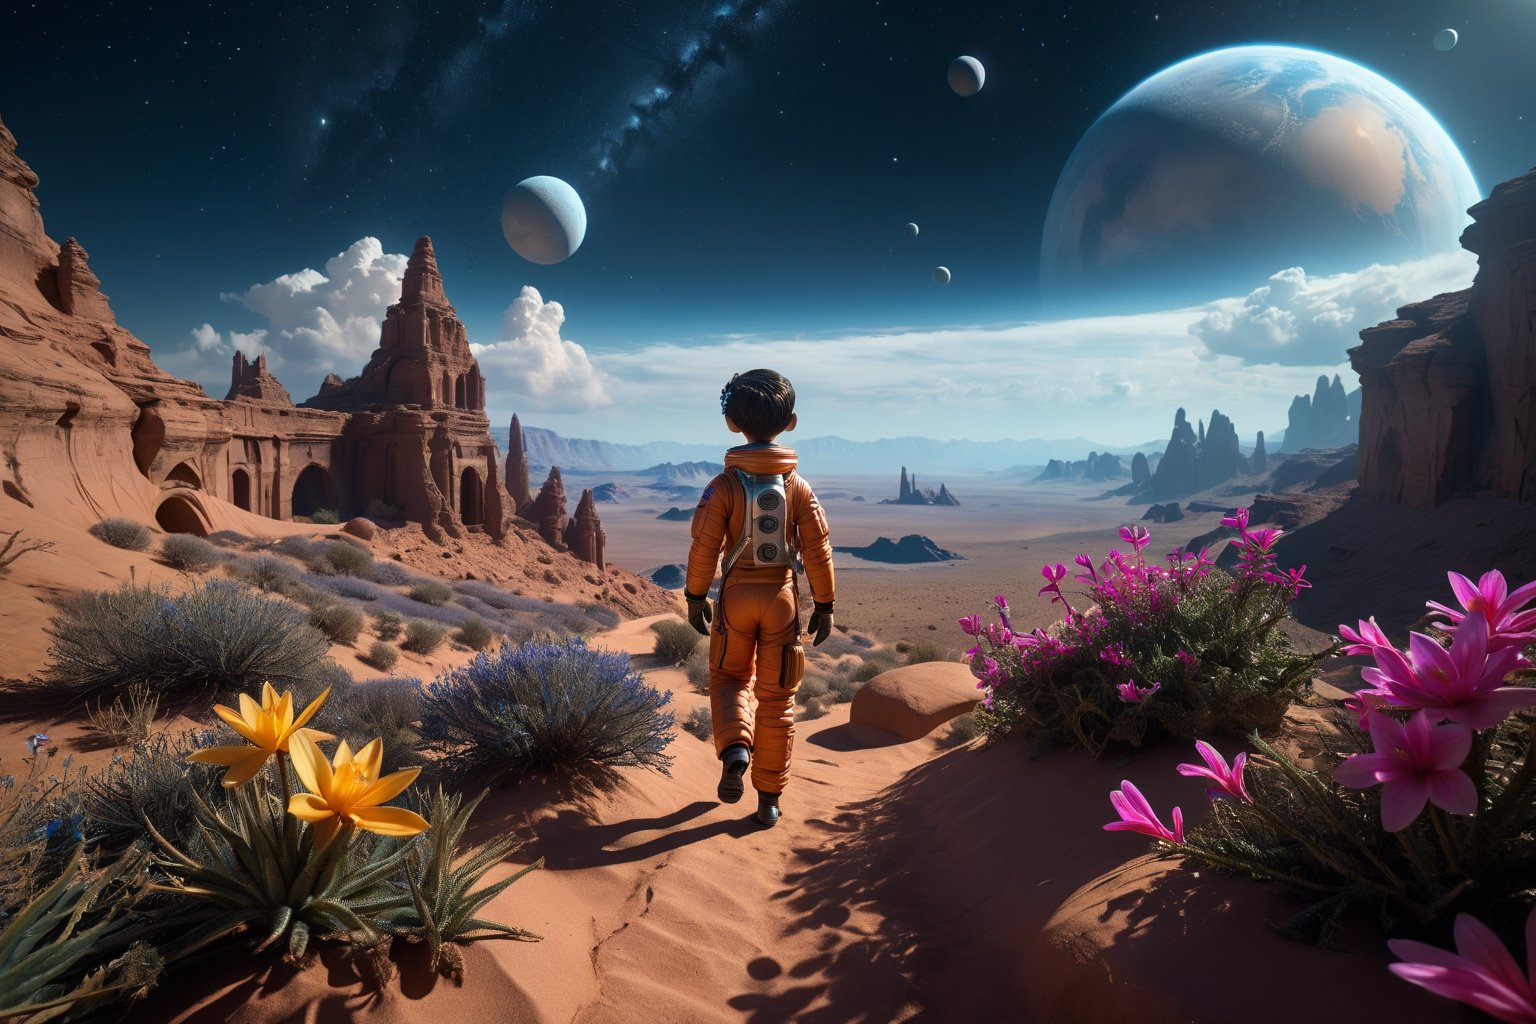 (Masterpiece), (hyper-realistic), (perfectly Detailed) image of the back of an astronout, 1boy, walking alone in an unknown and ancient landscape, full of bizzare yet fascinating flora and fauna. Even though hes alone but he still maintain his calm and keep walking forward. Artistic photography, absurdres, masterpiece 8K HDR quality image, full background, nature, beautiful, (depth of field), volumetric lighting, perfect composition,c0raline_style, vivid, high fantasy